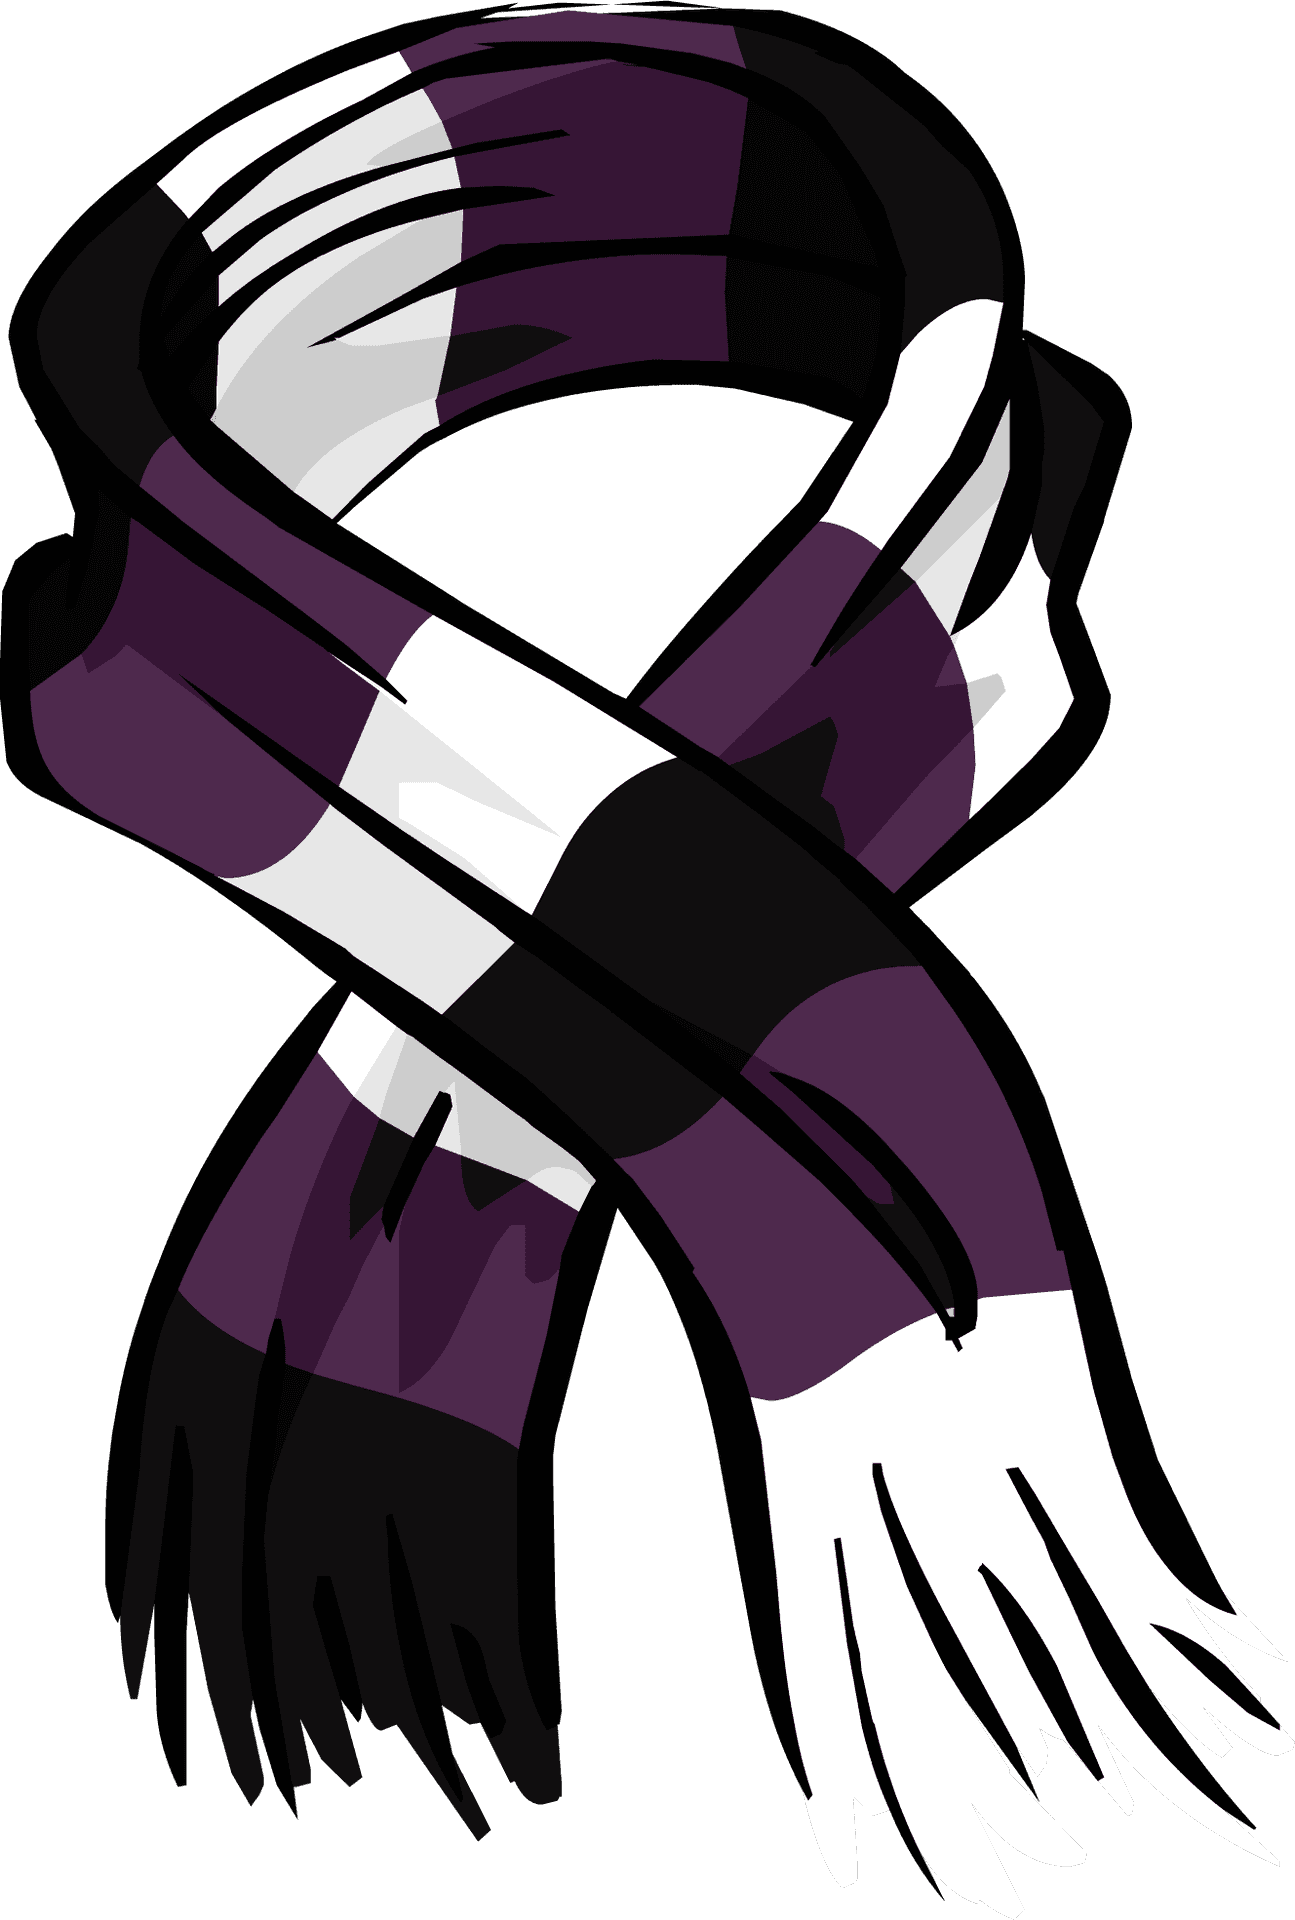 Striped Winter Scarf Illustration.png PNG